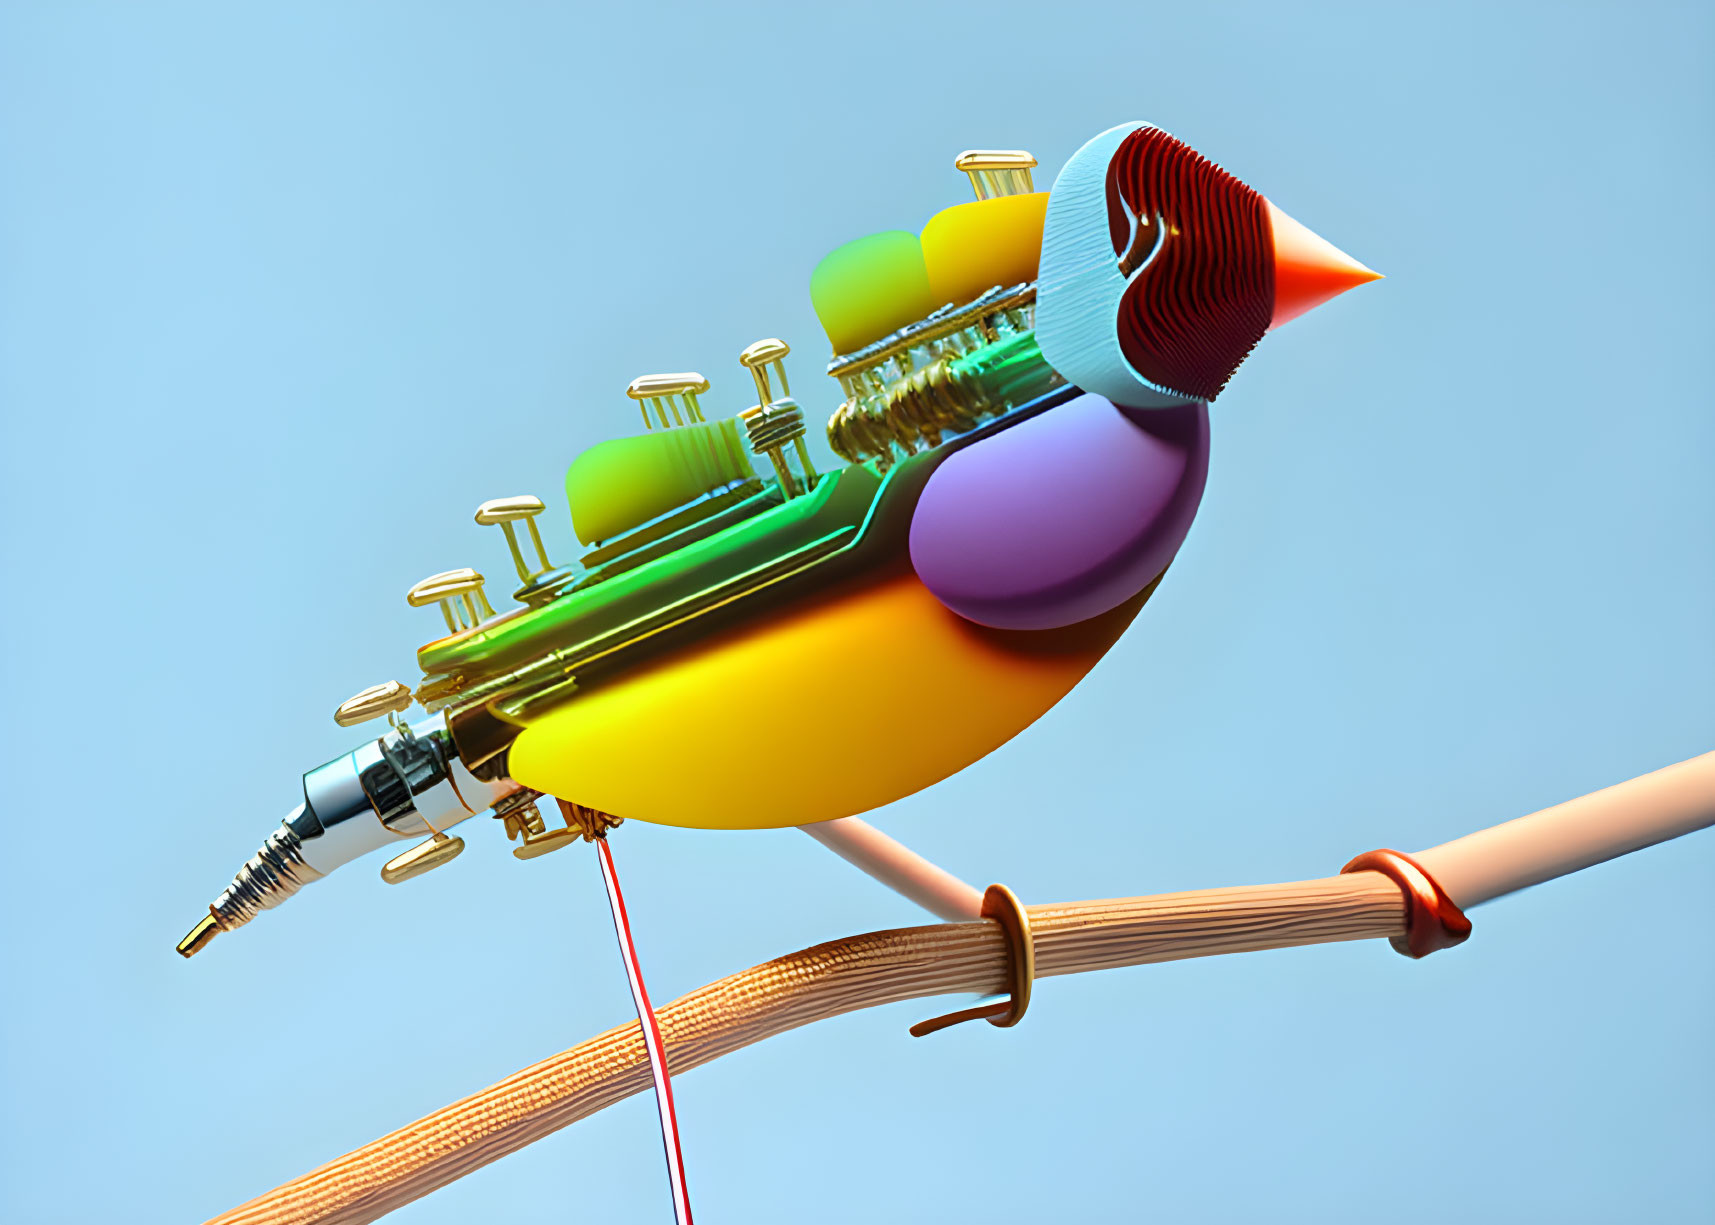 Colorful mechanical bird with plunger & gears perched on branch against blue background